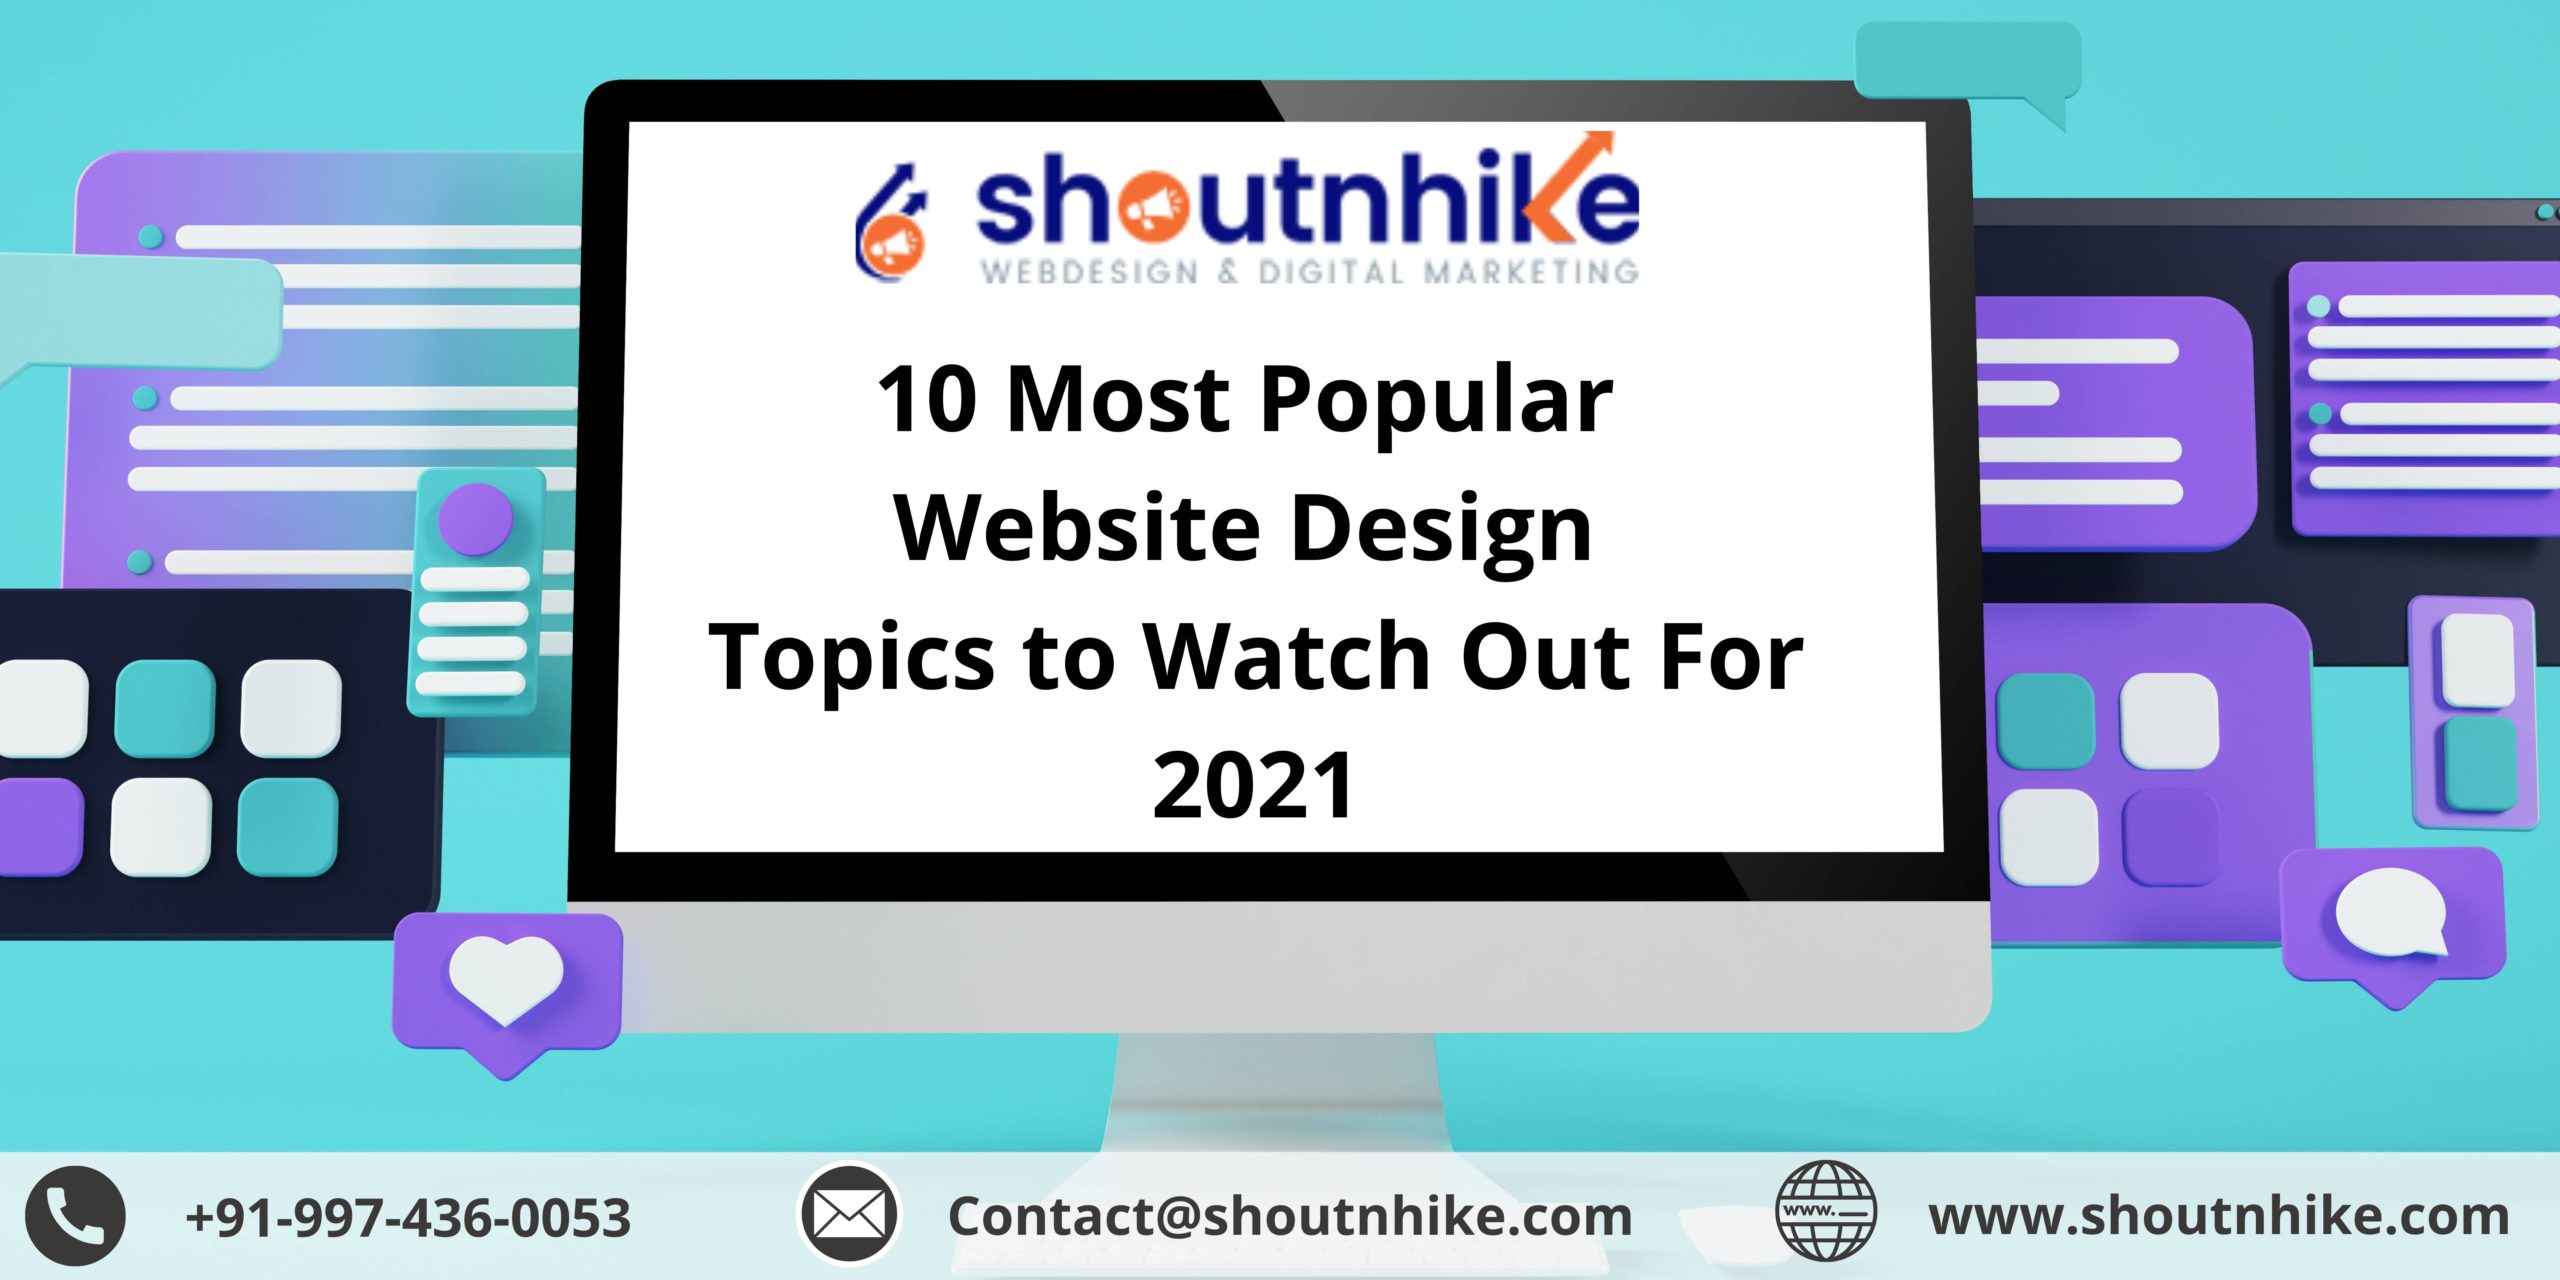 10 Most Popular Website Design Topics to Watch Out For 2021